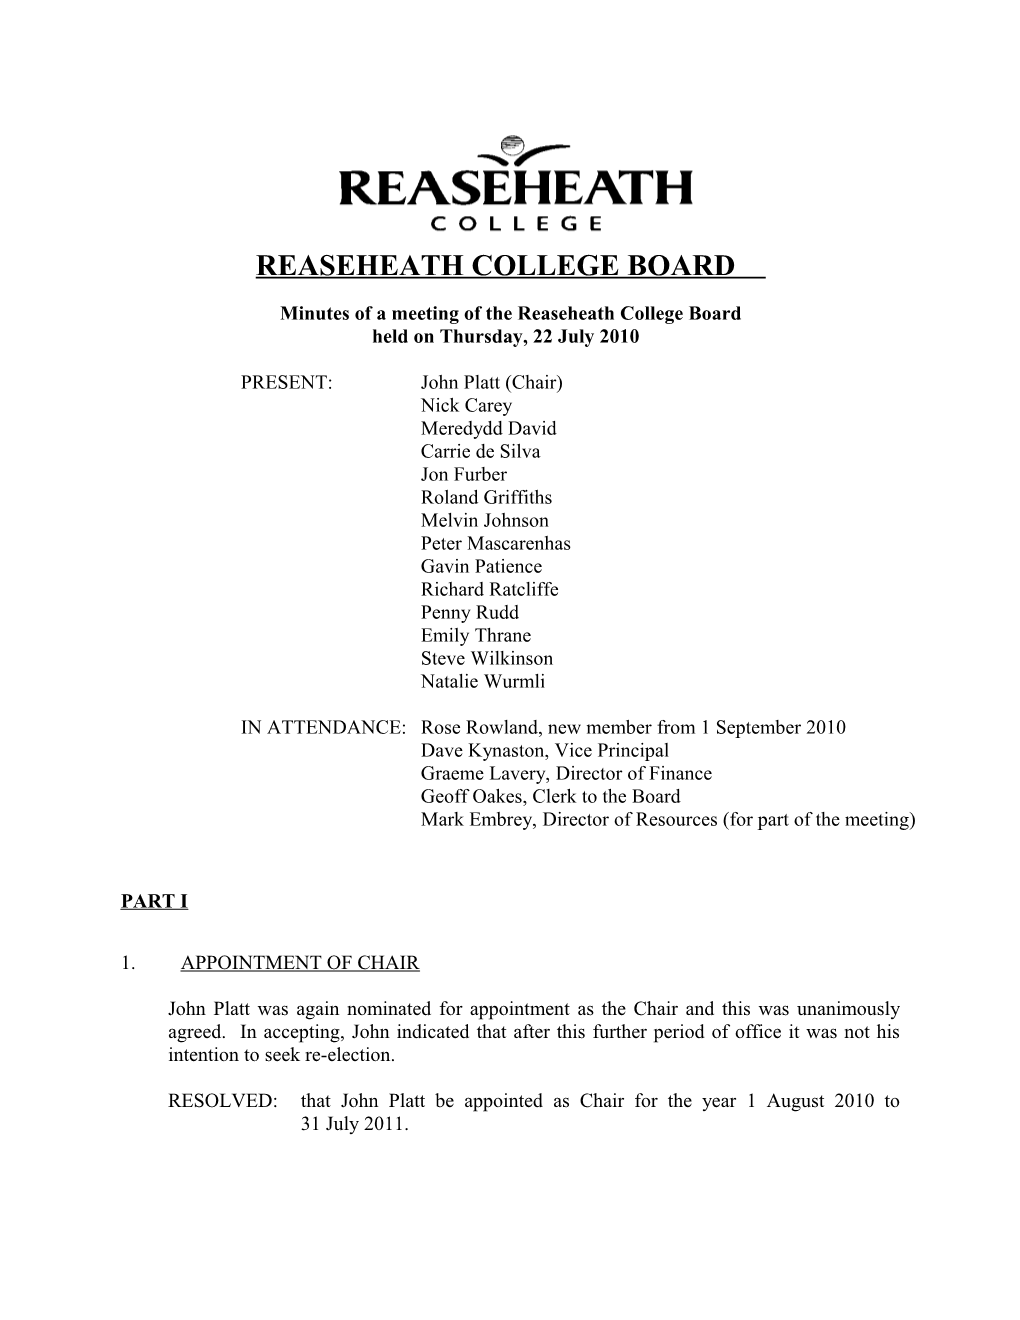 Minutes of a Meeting of the Reaseheath College Board